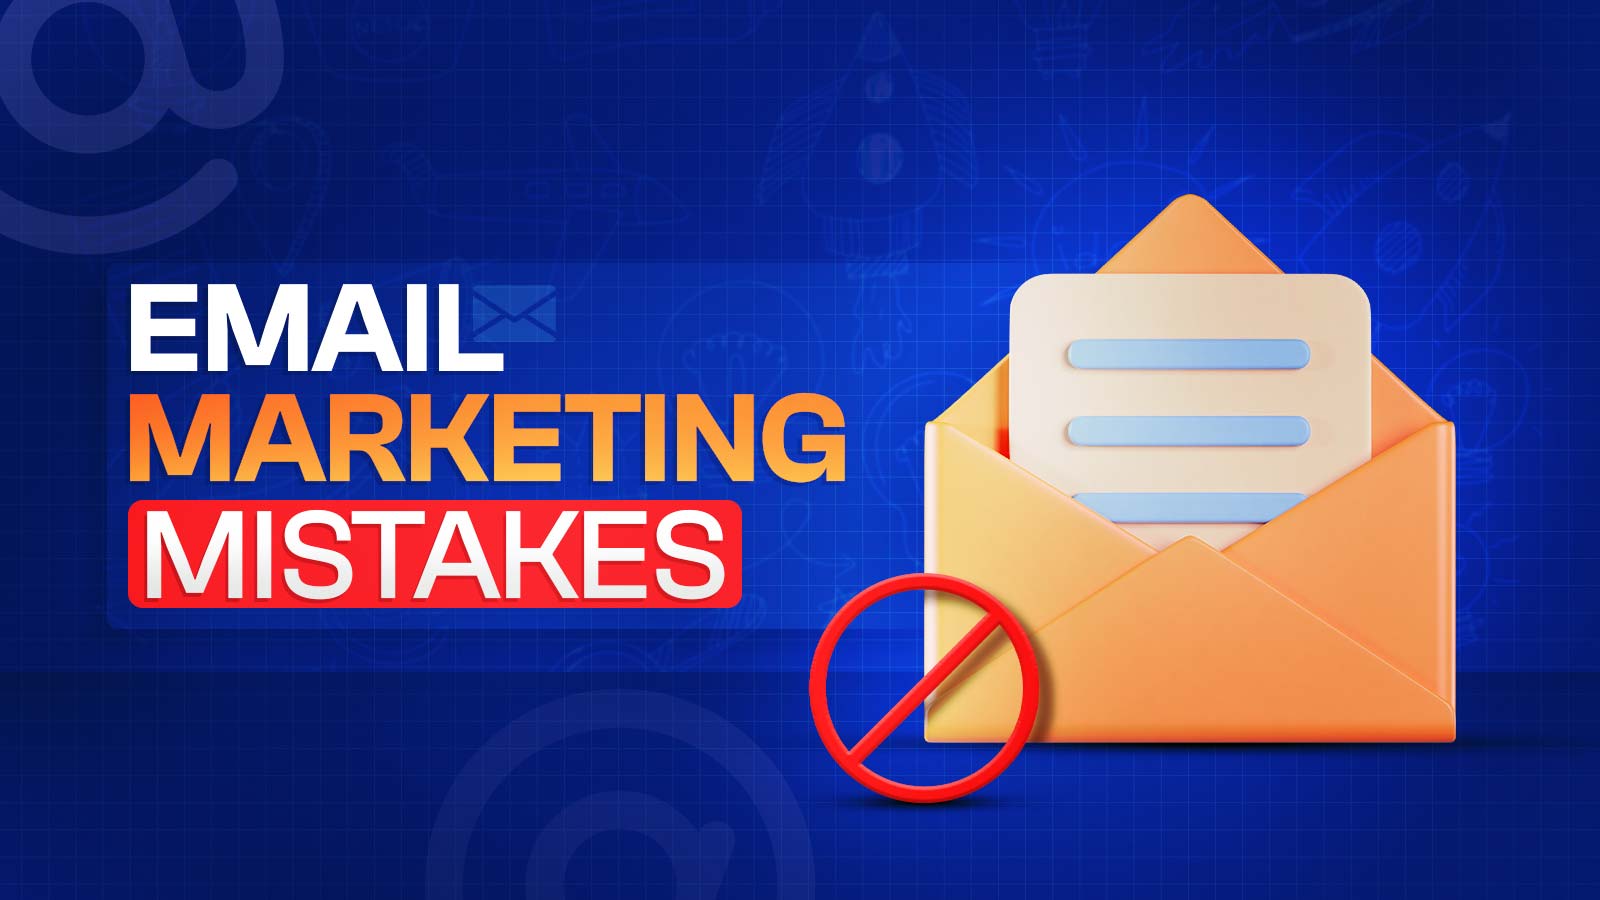 27 Common Email Marketing Mistakes To Avoid – Be Careful!